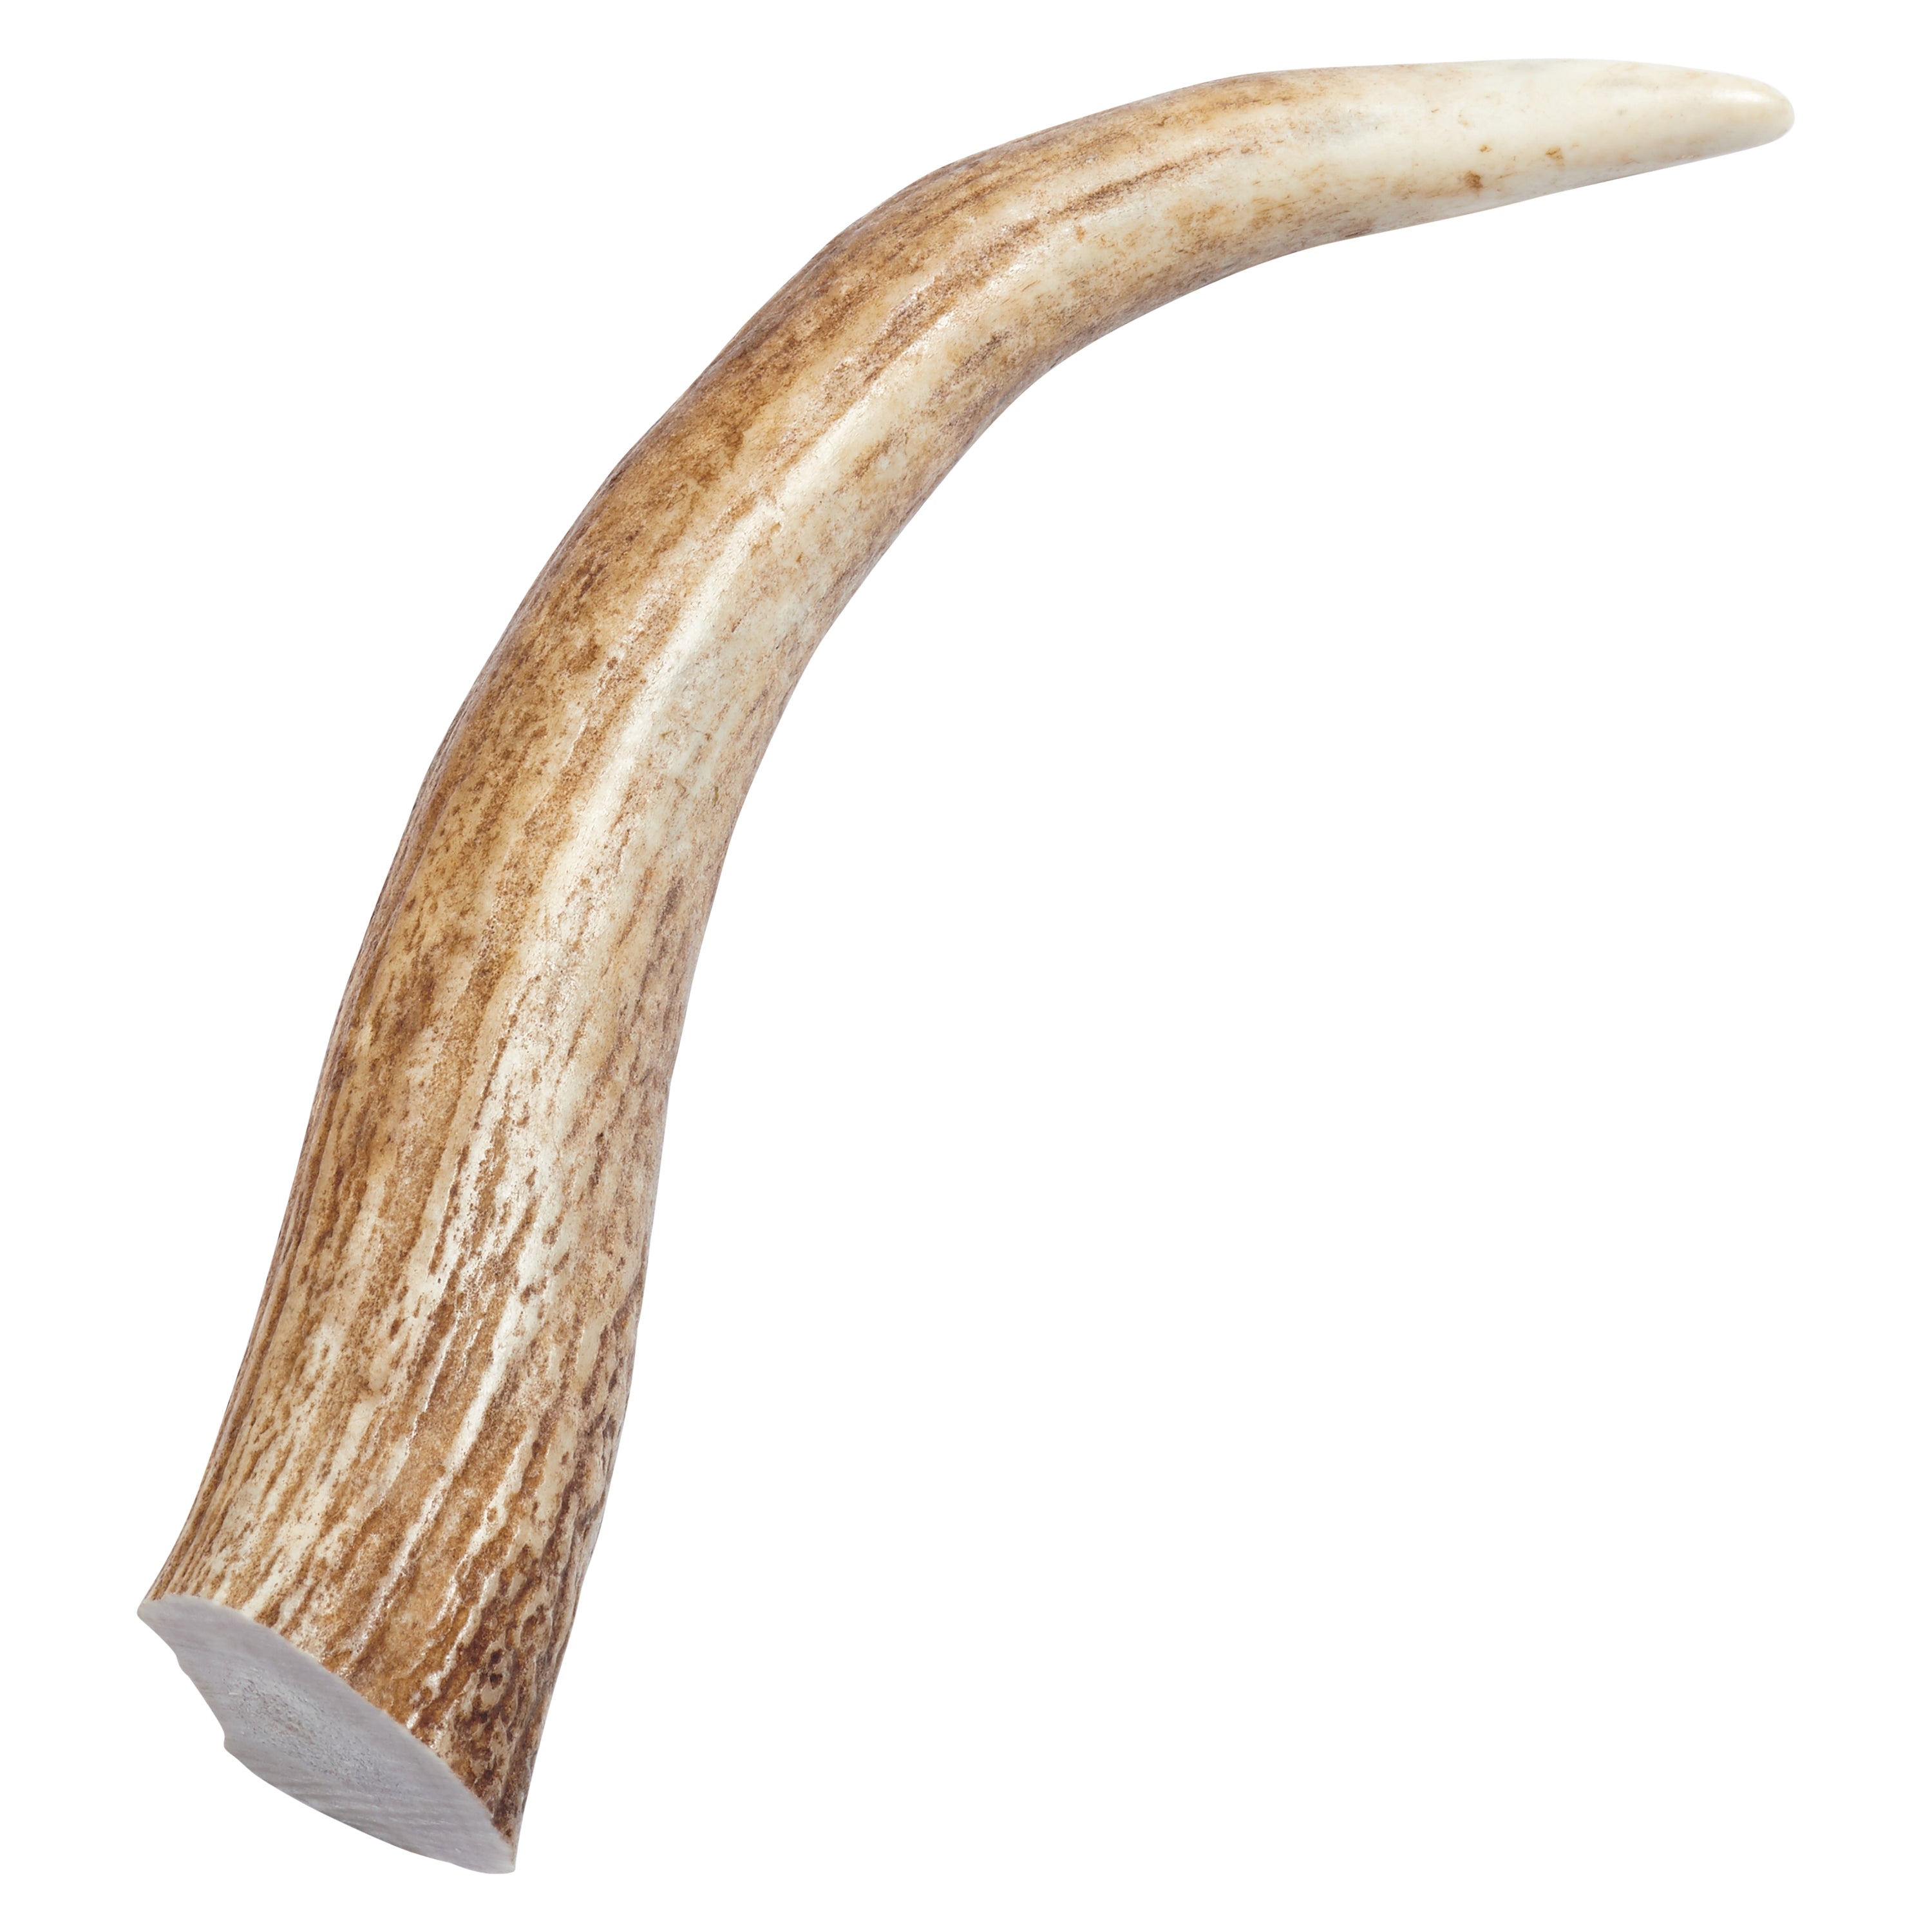 cheap elk antlers for dogs